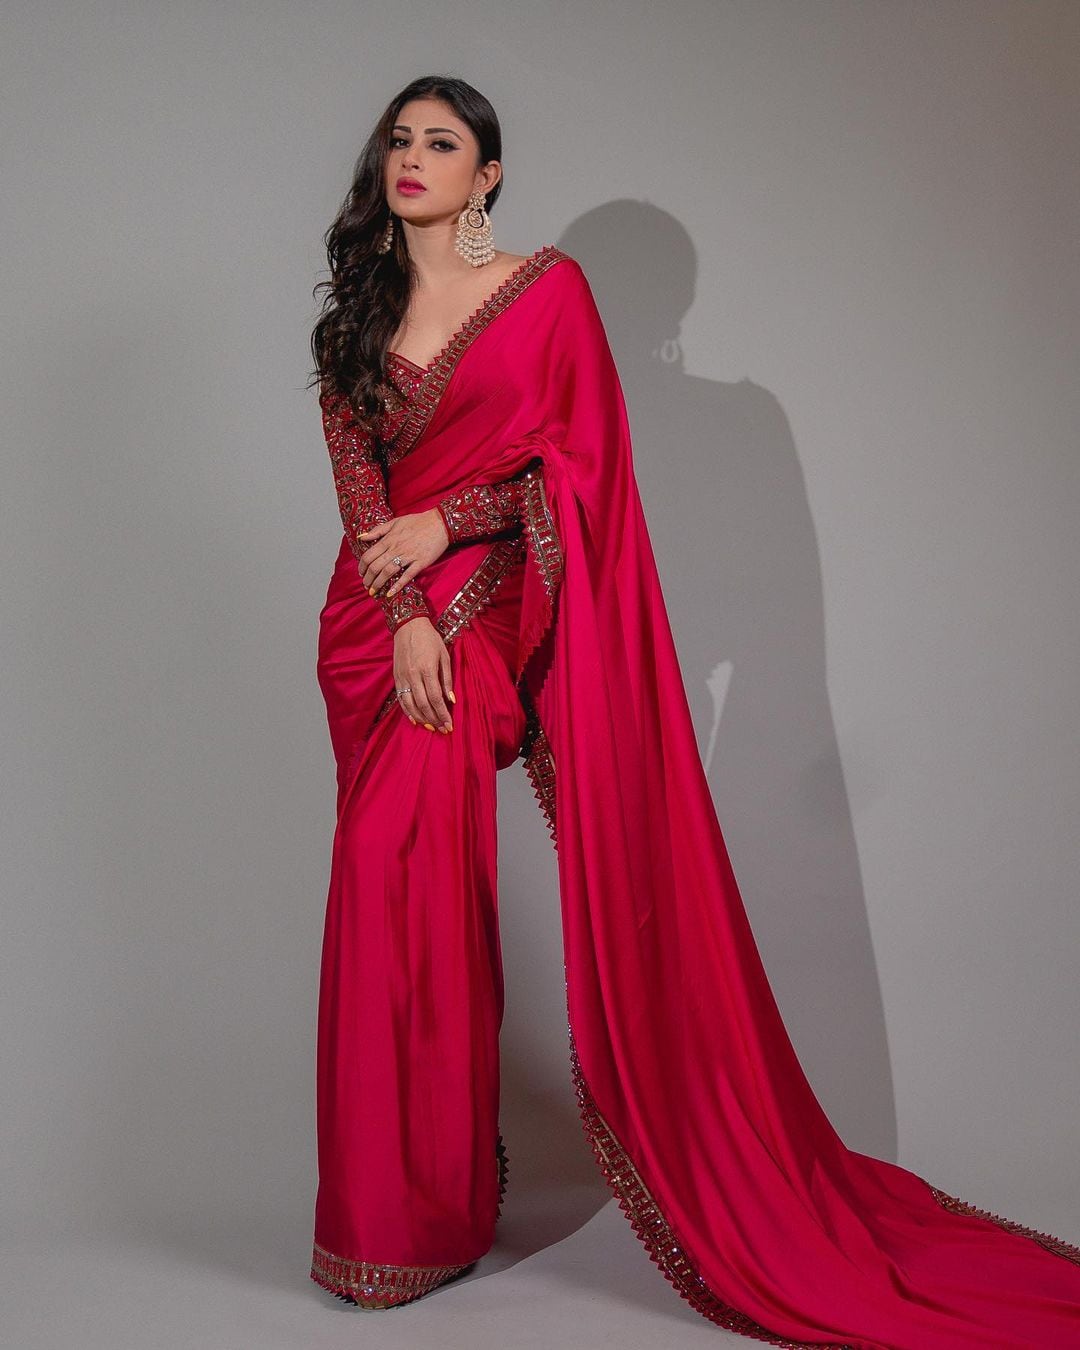 Mouni Roy looks breathtaking in a deep red saree